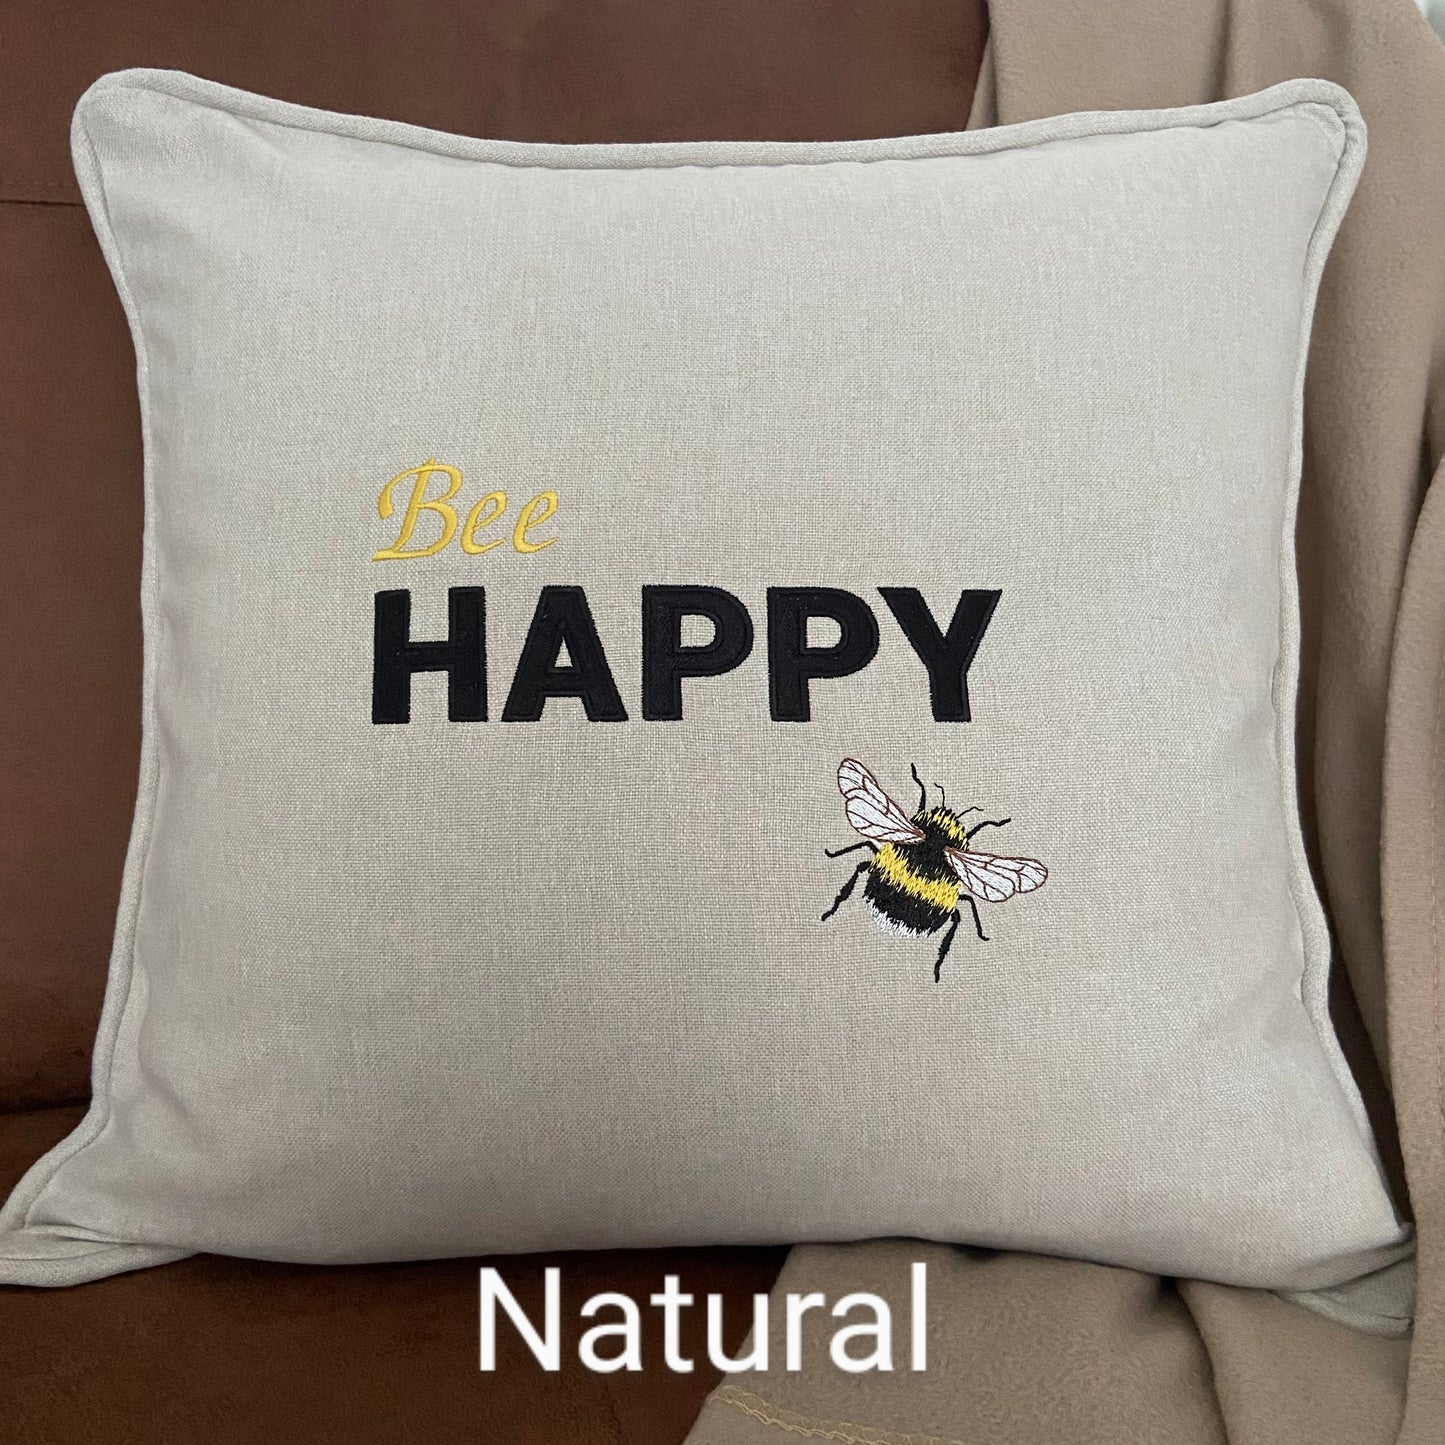 Bee Happy Embroidered Cushion Cover - 45cm x 45cm